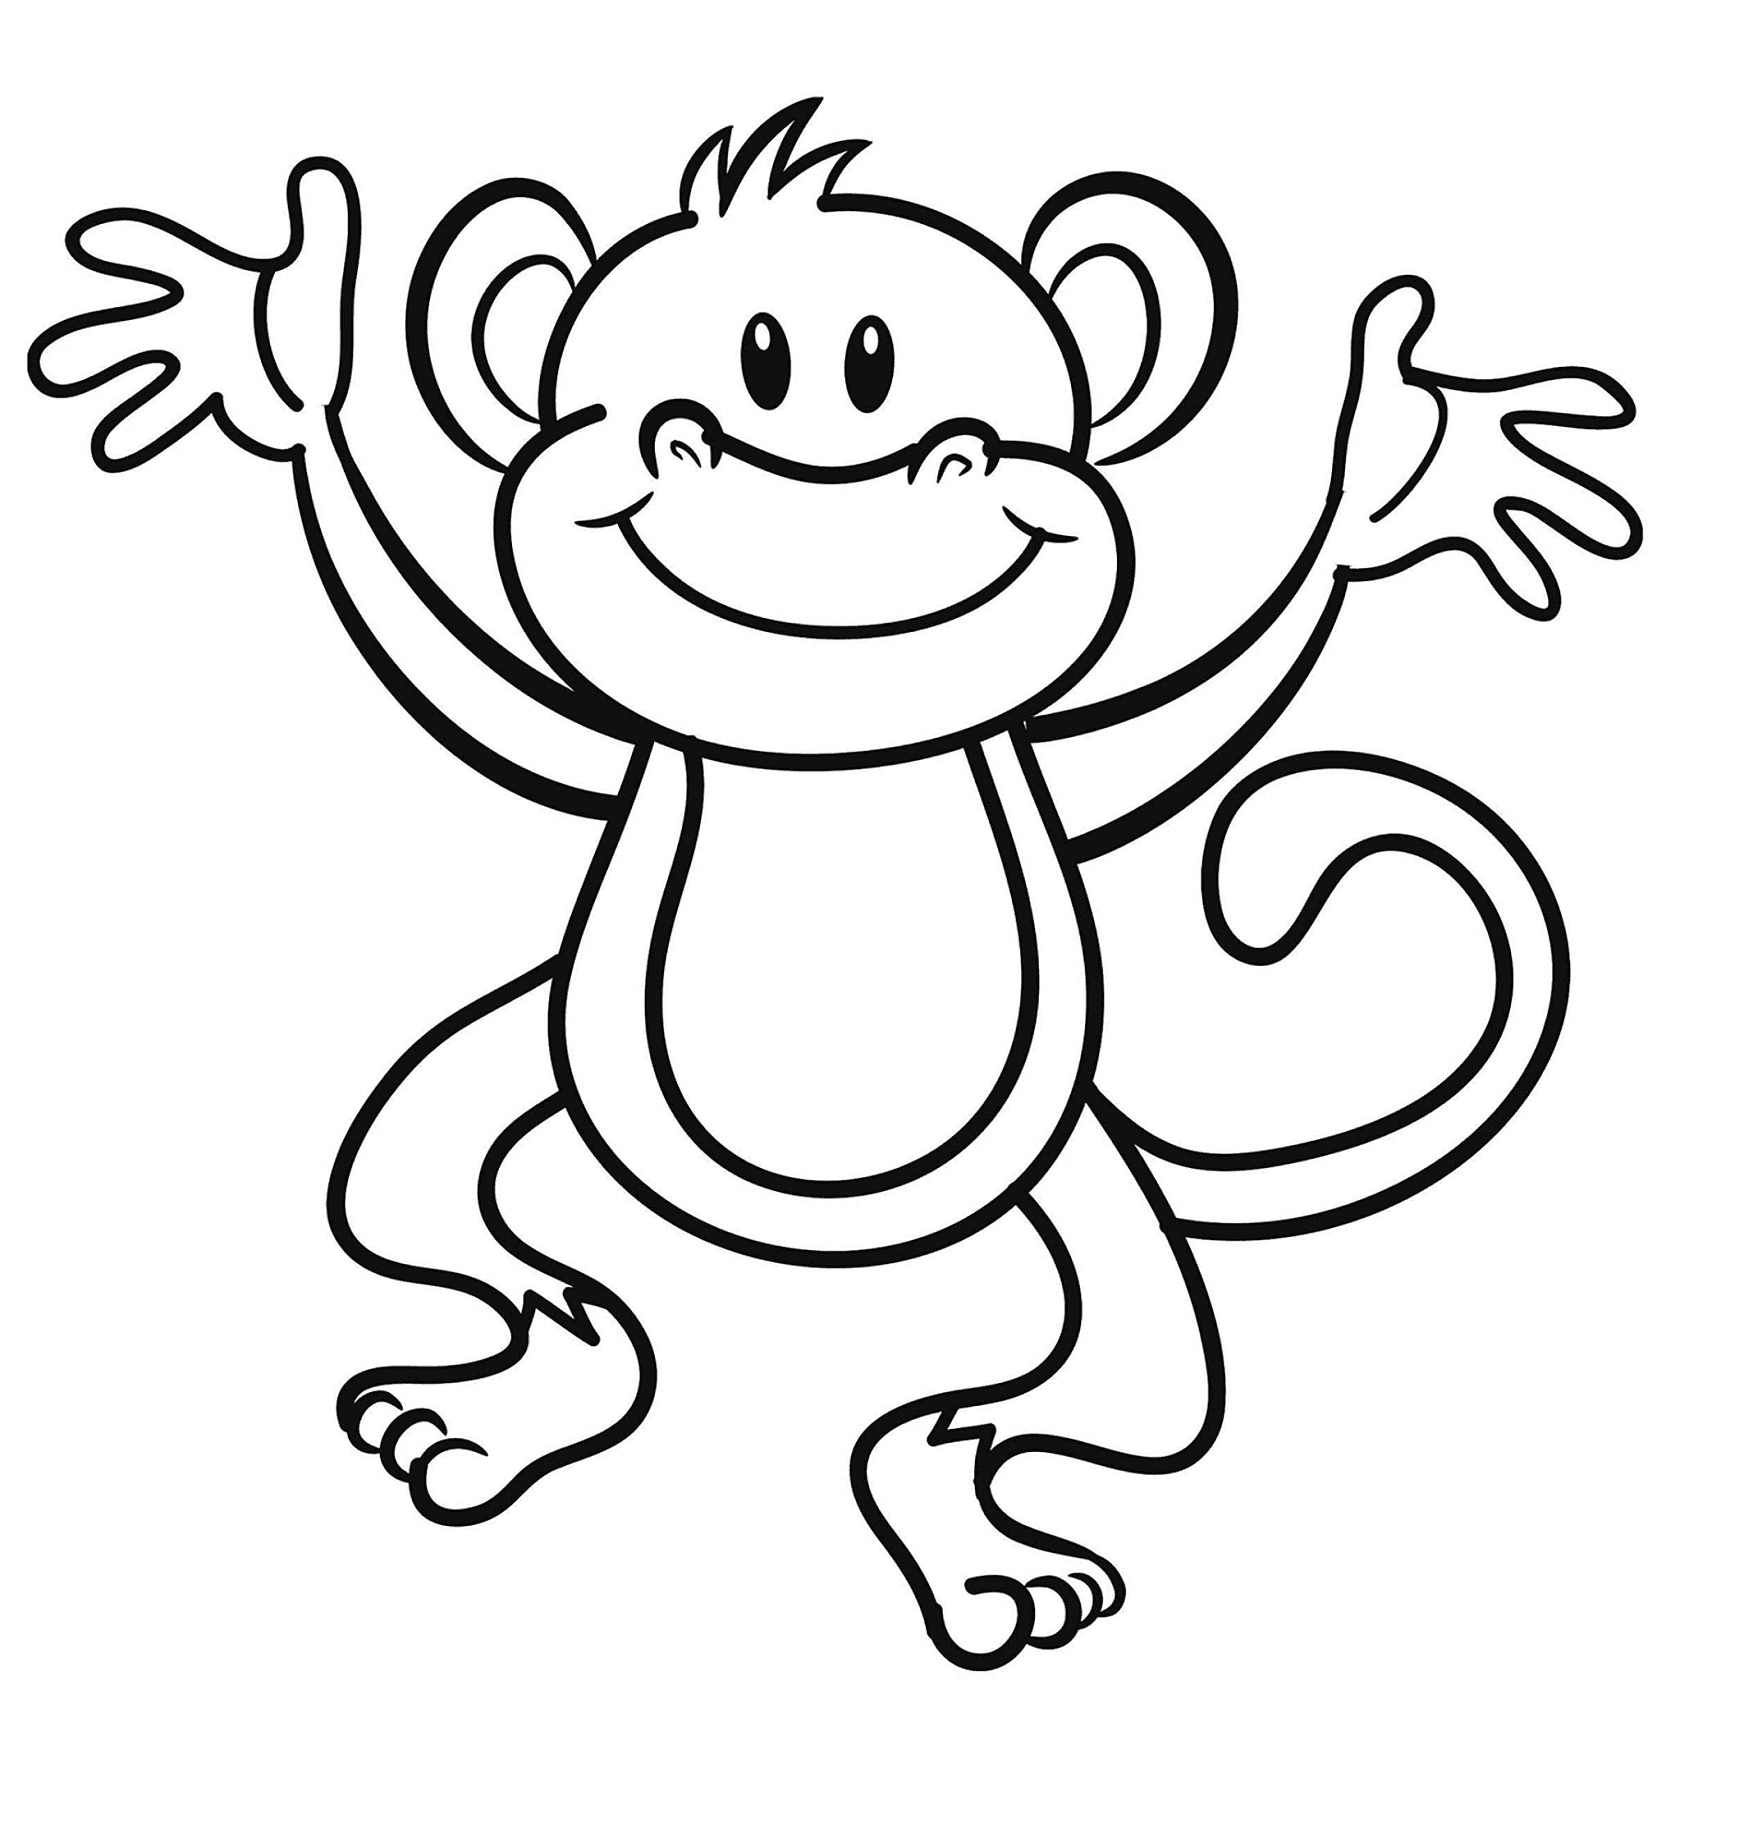 Smiling Monkey Coloring Page